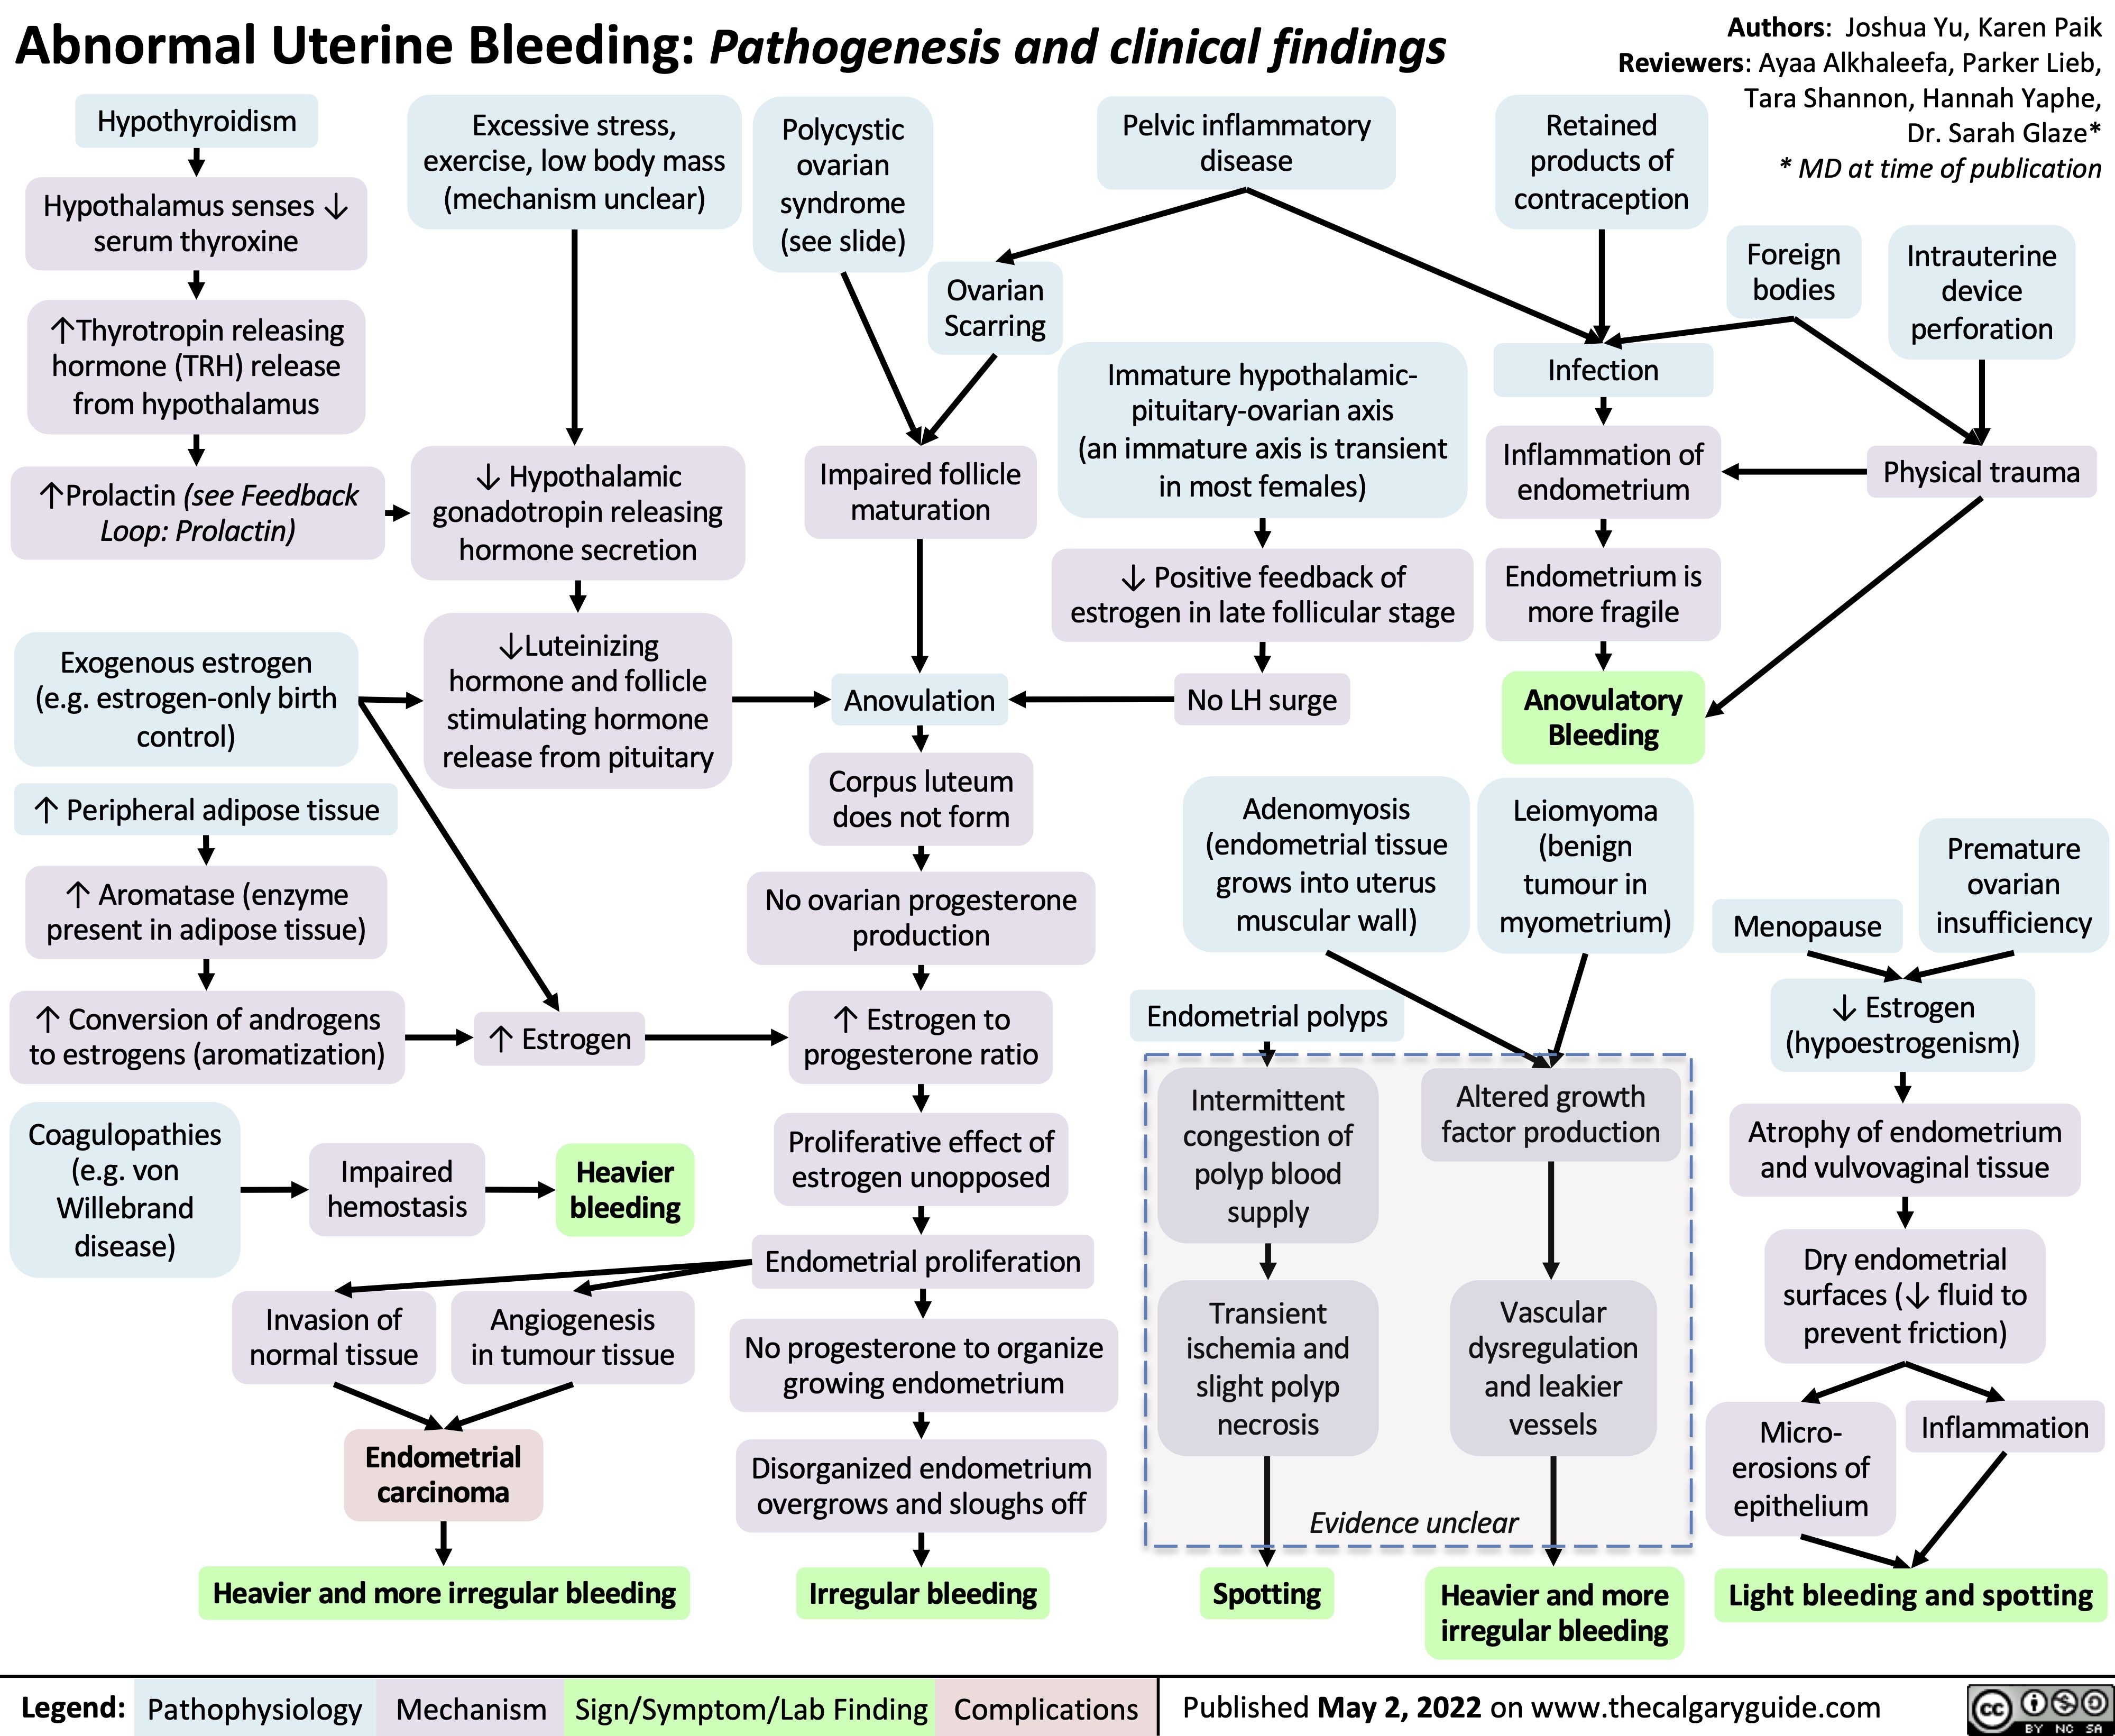 Abnormal Uterine Bleeding: Pathogenesis and clinical findings
Authors: Joshua Yu, Karen Paik Reviewers: Ayaa Alkhaleefa, Parker Lieb,
     Hypothyroidism
Hypothalamus senses ↓ serum thyroxine
↑Thyrotropin releasing hormone (TRH) release from hypothalamus
↑Prolactin (see Feedback Loop: Prolactin)
Exogenous estrogen (e.g. estrogen-only birth control)
↑ Peripheral adipose tissue
↑ Aromatase (enzyme present in adipose tissue)
↑ Conversion of androgens to estrogens (aromatization)
Excessive stress, exercise, low body mass (mechanism unclear)
↓ Hypothalamic gonadotropin releasing hormone secretion
↓Luteinizing hormone and follicle stimulating hormone release from pituitary
↑ Estrogen
Heavier bleeding
Angiogenesis in tumour tissue
Polycystic ovarian syndrome (see slide)
Pelvic inflammatory disease
Immature hypothalamic- pituitary-ovarian axis
(an immature axis is transient in most females)
↓ Positive feedback of estrogen in late follicular stage
No LH surge
Adenomyosis (endometrial tissue grows into uterus muscular wall)
Endometrial polyps
Retained products of contraception
Infection
Inflammation of endometrium
Endometrium is more fragile
Anovulatory Bleeding
Leiomyoma (benign tumour in myometrium)
Tara Shannon, Hannah Yaphe, Dr. Sarah Glaze* * MD at time of publication
       Ovarian Scarring
Foreign bodies
Intrauterine device perforation
Physical trauma
          Impaired follicle maturation
Anovulation
Corpus luteum does not form
No ovarian progesterone production
↑ Estrogen to progesterone ratio
Proliferative effect of estrogen unopposed
Endometrial proliferation
No progesterone to organize growing endometrium
Disorganized endometrium overgrows and sloughs off
Irregular bleeding
Menopause
Premature ovarian insufficiency
                                Intermittent congestion of polyp blood supply
Transient ischemia and slight polyp necrosis
Altered growth factor production
Vascular dysregulation and leakier vessels
   Coagulopathies (e.g. von Willebrand disease)
Impaired hemostasis
Invasion of normal tissue
↓ Estrogen (hypoestrogenism)
Atrophy of endometrium and vulvovaginal tissue
Dry endometrial surfaces (↓ fluid to prevent friction)
                Endometrial carcinoma
Micro- erosions of epithelium
Inflammation
    Evidence unclear
      Heavier and more irregular bleeding
Spotting
Heavier and more irregular bleeding
Light bleeding and spotting
 Legend:
 Pathophysiology
Mechanism
Sign/Symptom/Lab Finding
 Complications
 Published May 2, 2022 on www.thecalgaryguide.com
   